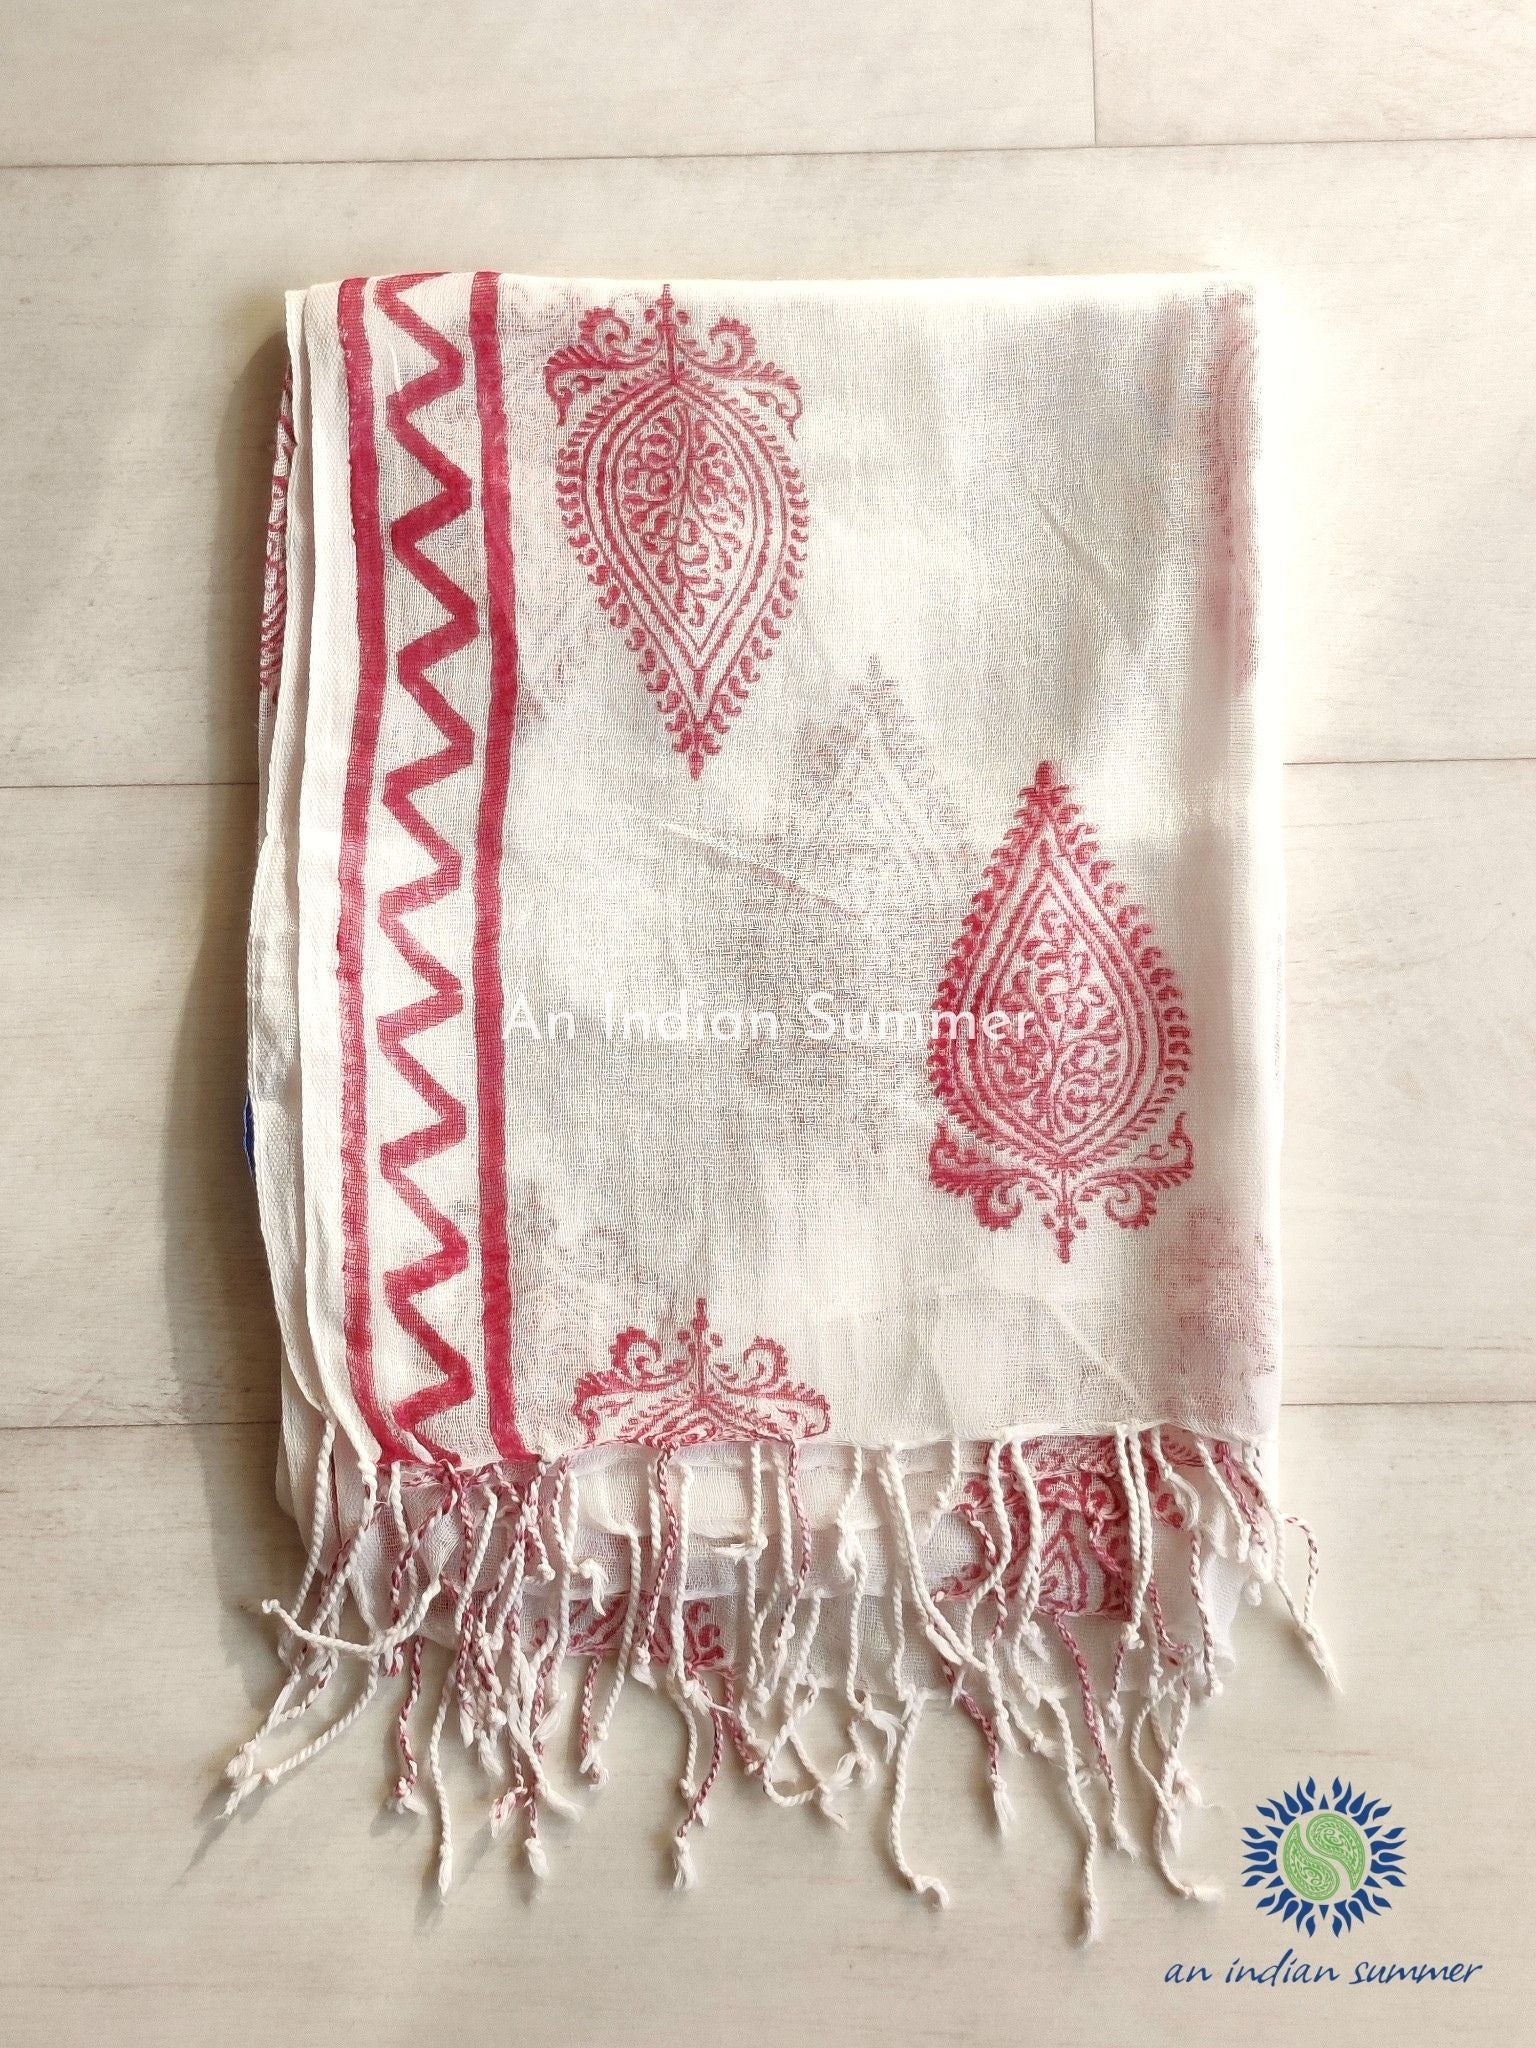 An Indian Summer Red Leaf Handloom Woven Hand Block Printed Cotton Gauze Scarf